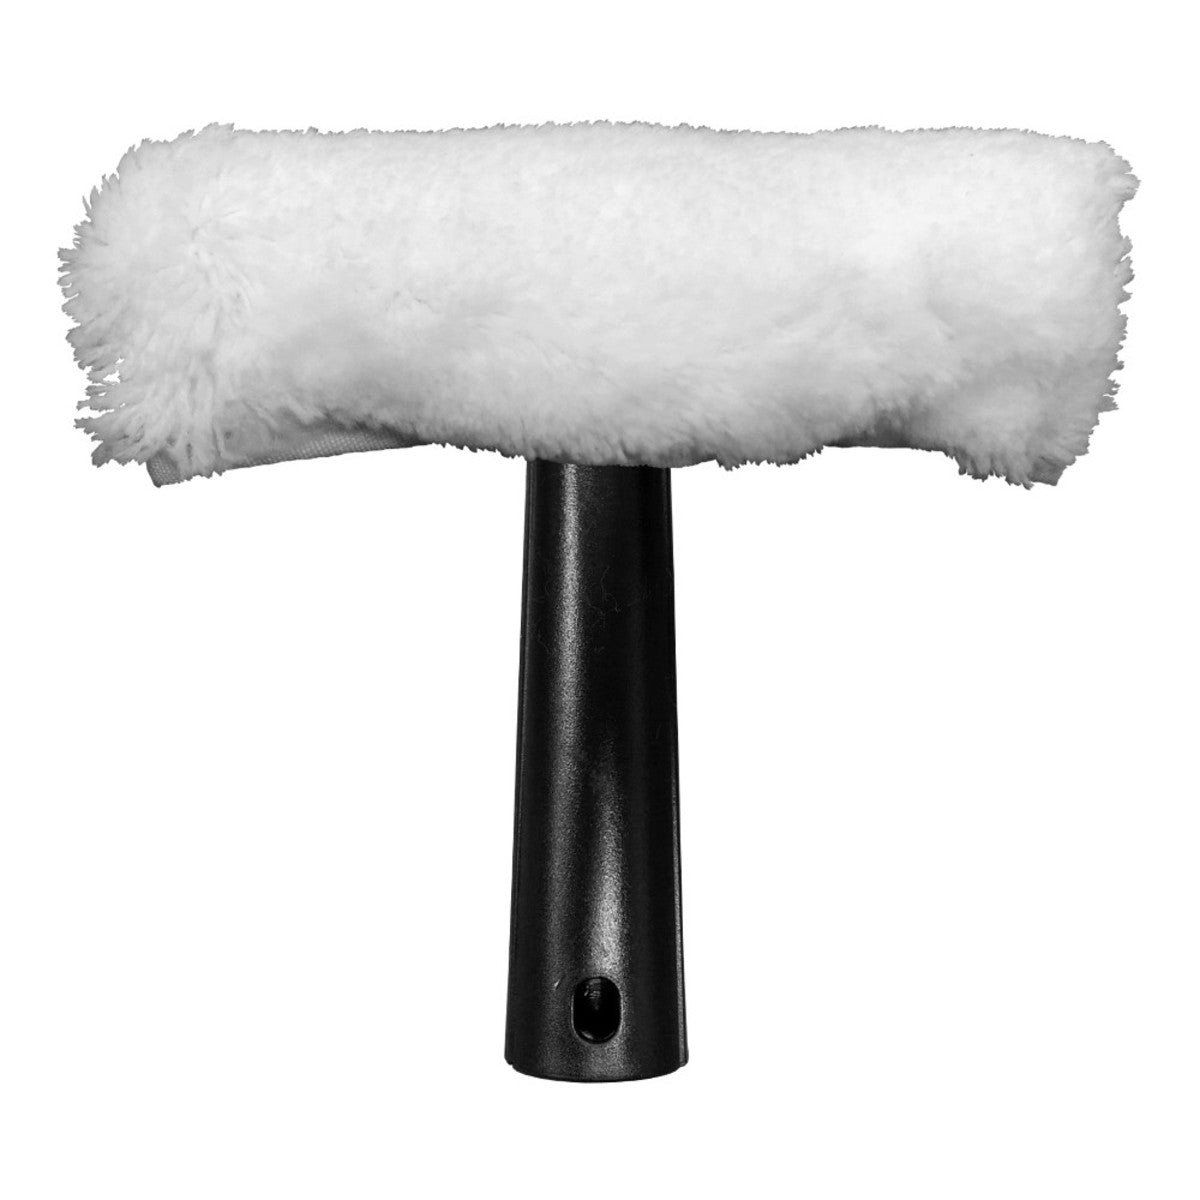 6 Inch Scrubber with White Sleeve